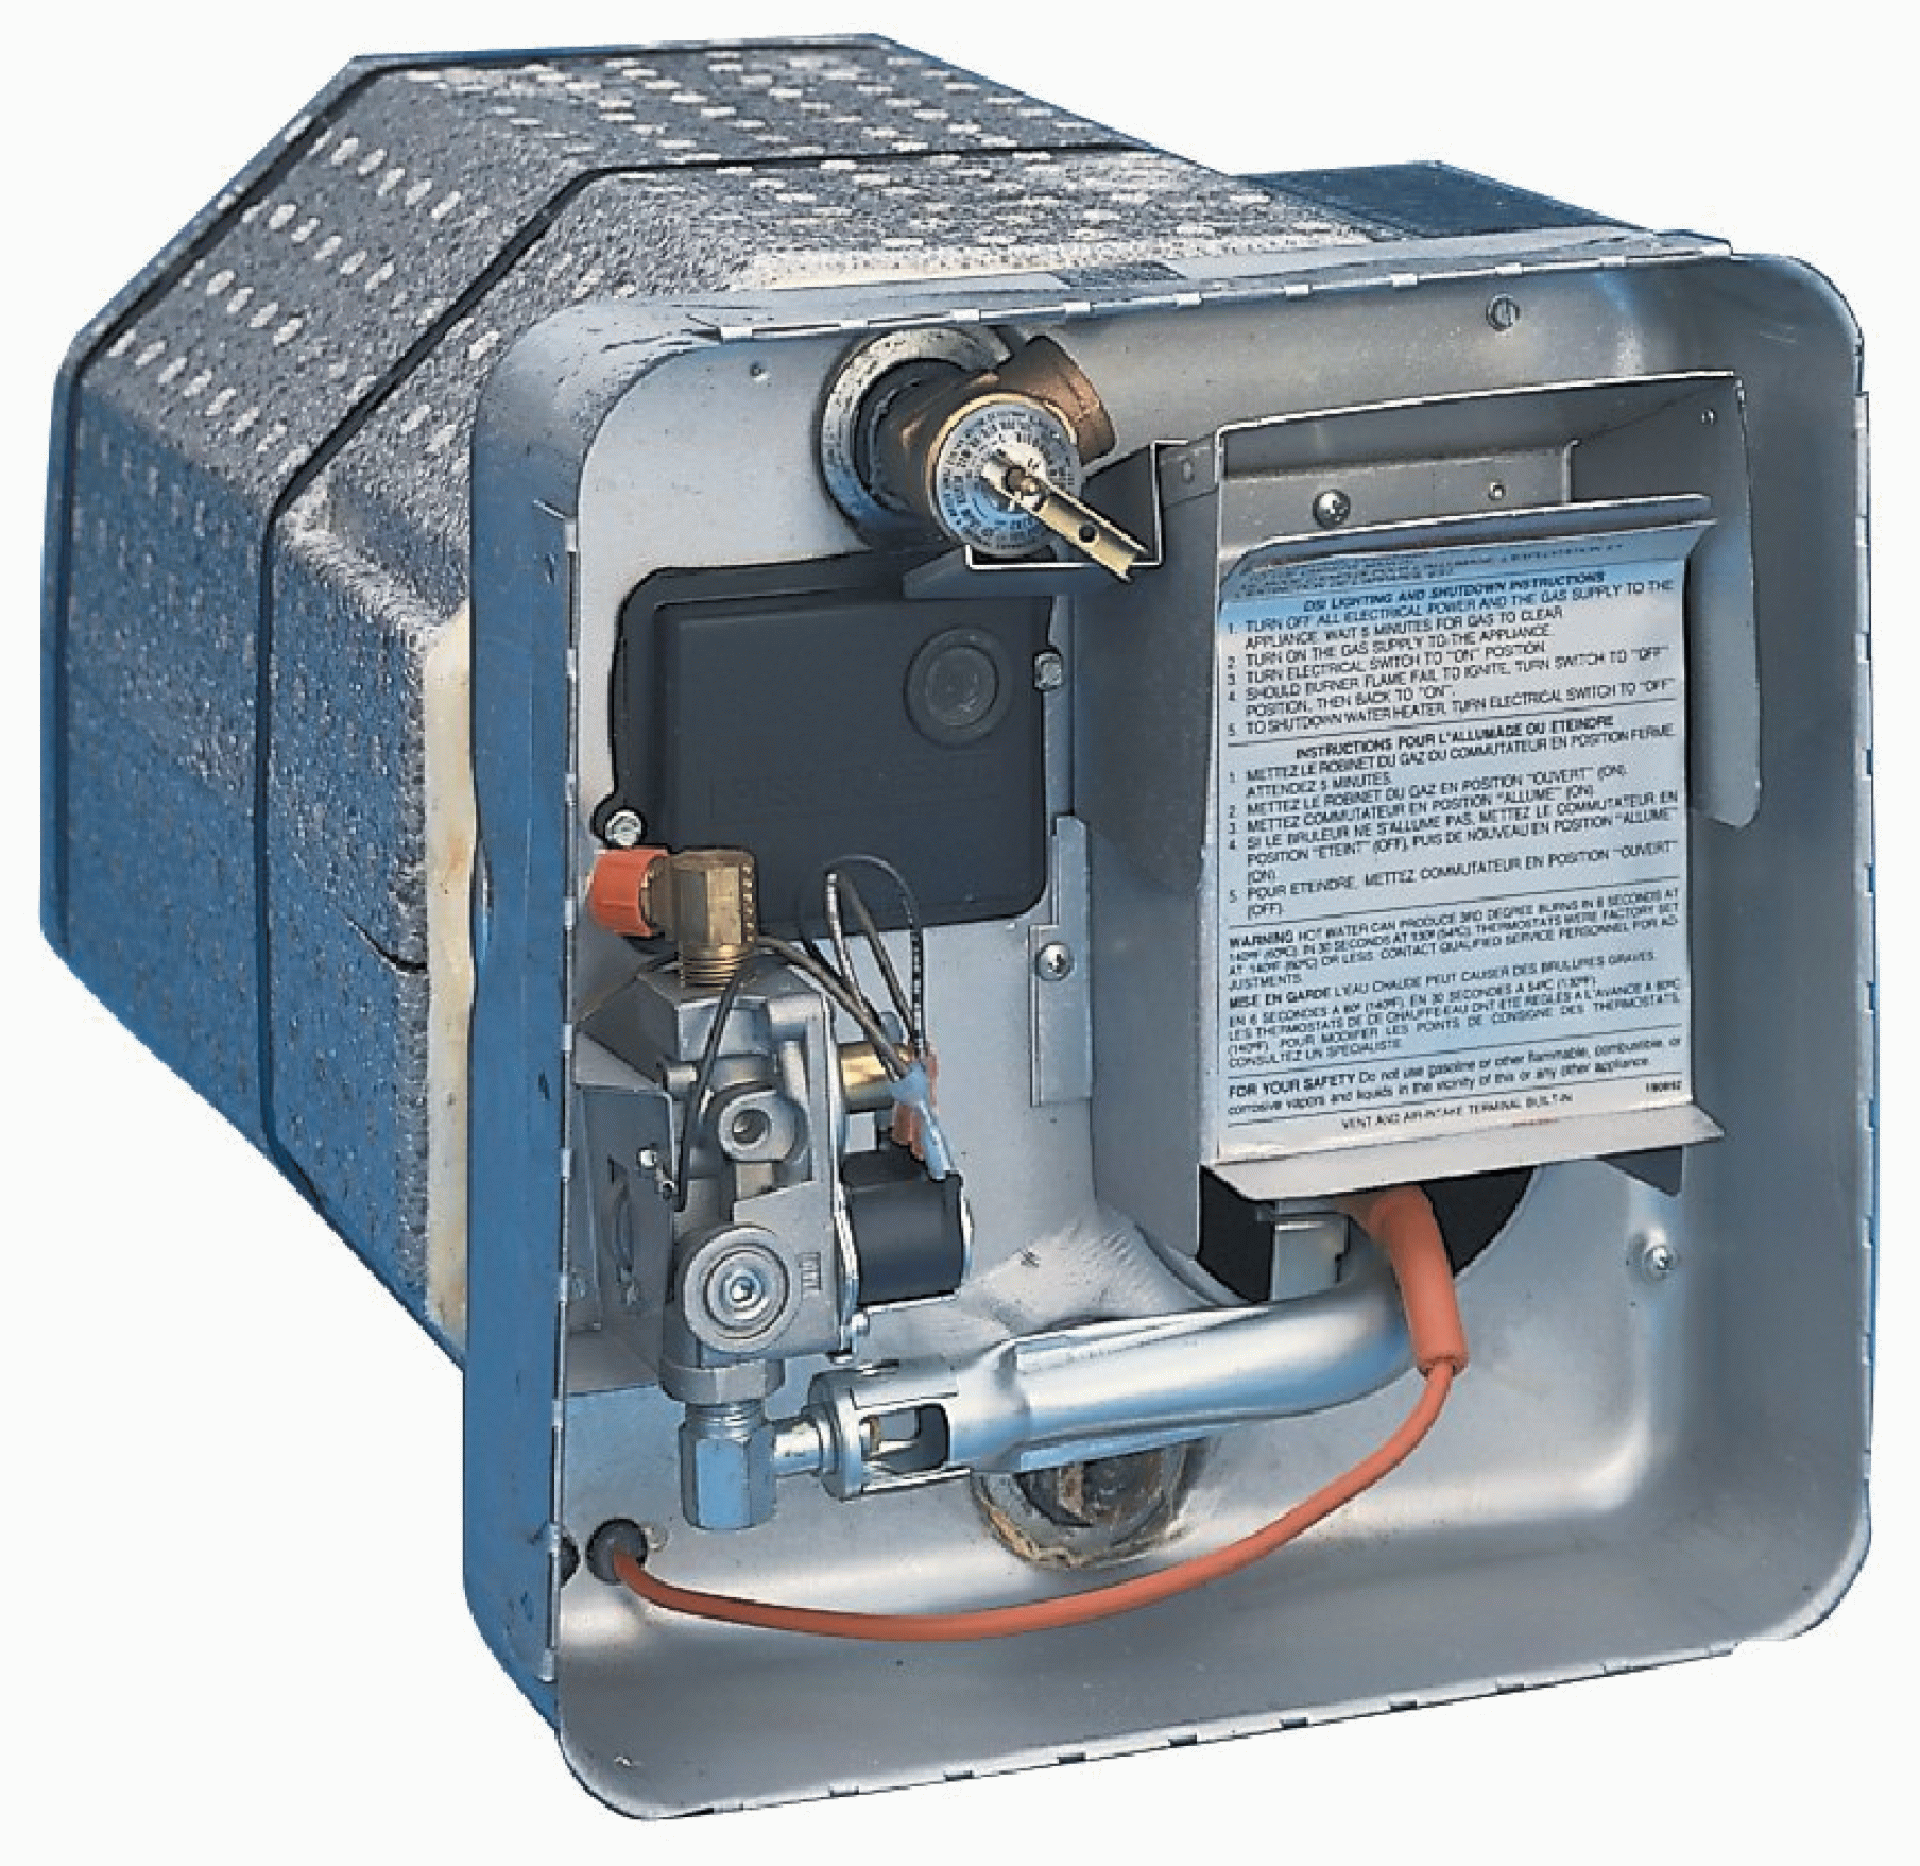 Suburban Mfg | 5121A | Water Heater Combination Direct Spark Ignition Gas & electric 6 Gallon